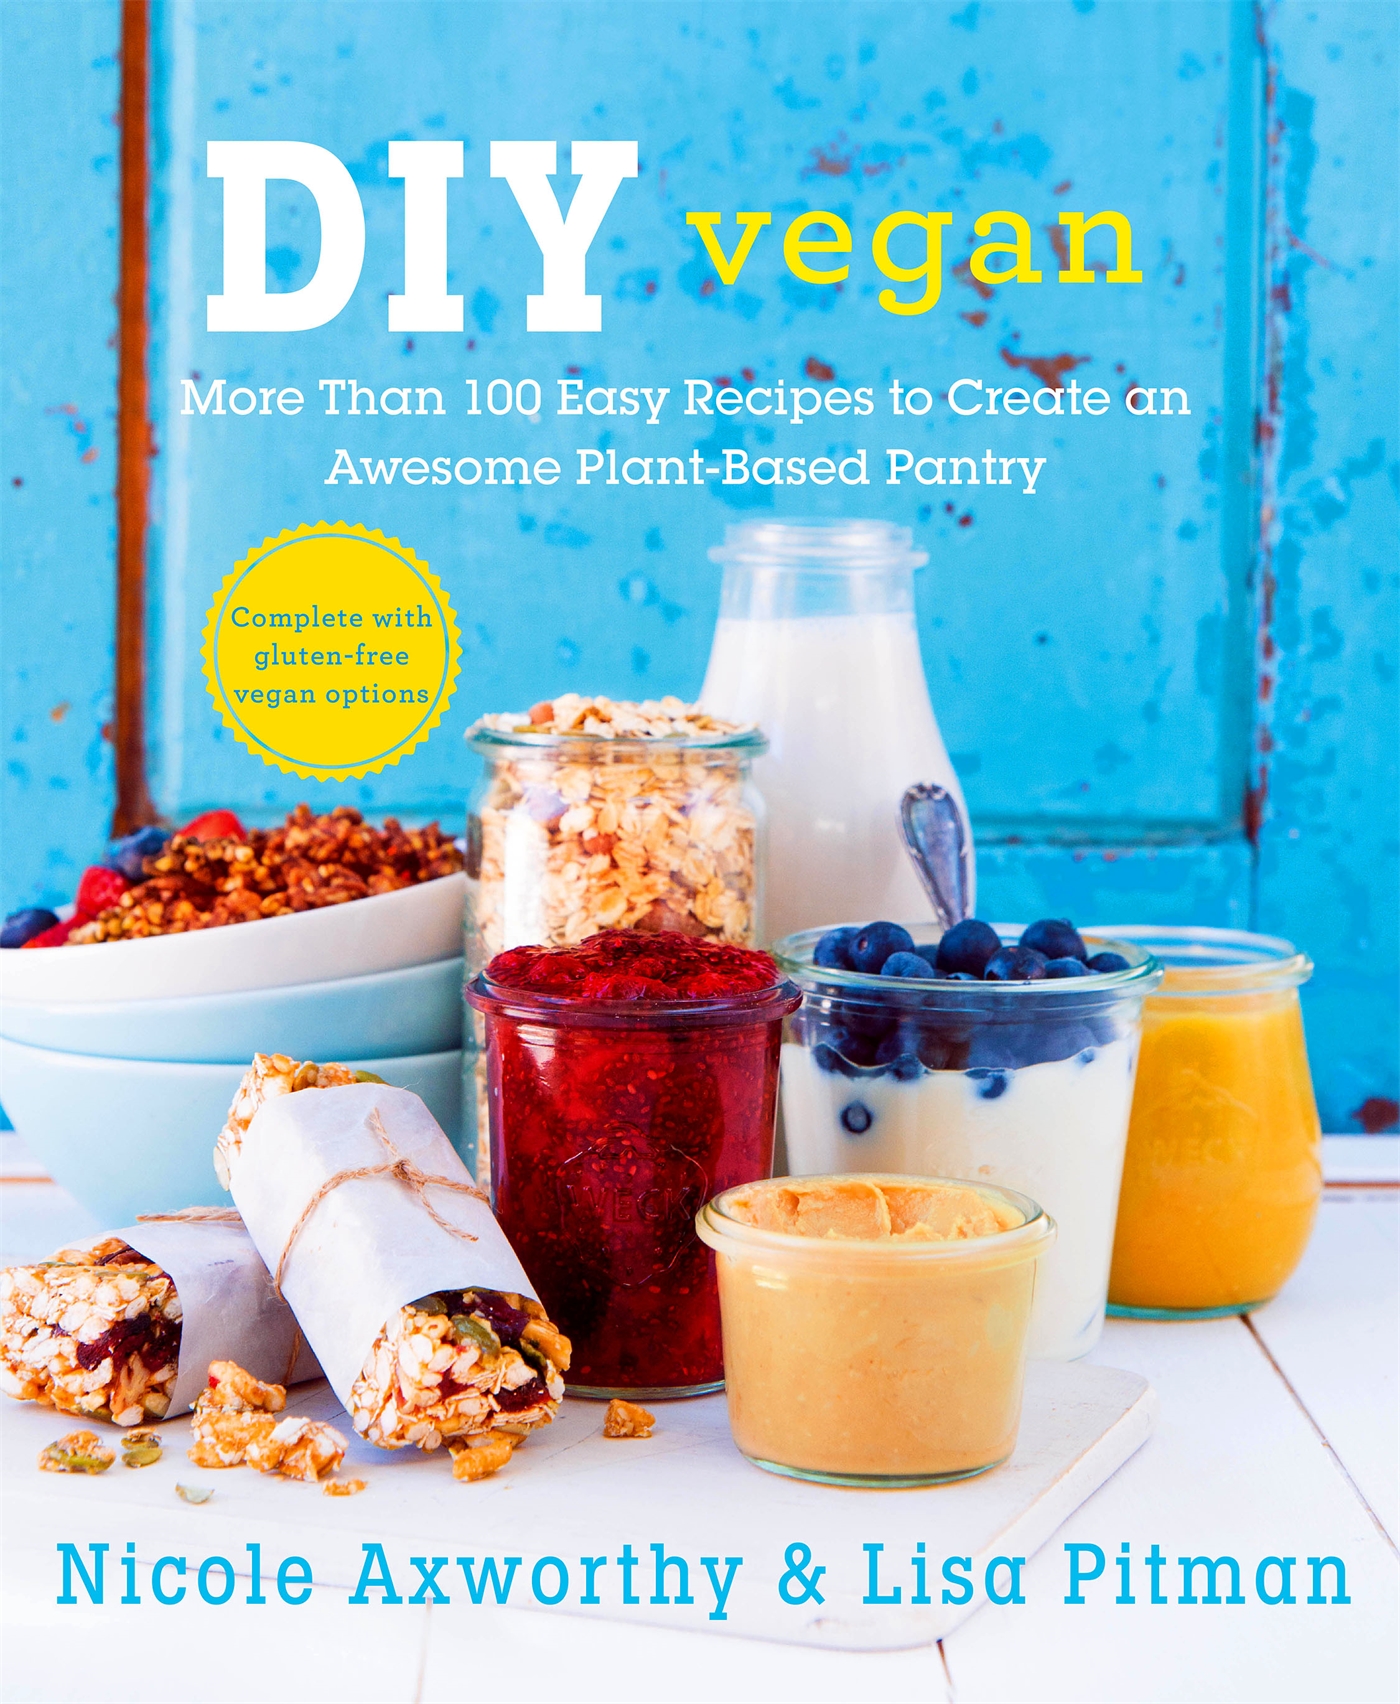 DIY vegan : more than 100 easy recipes to create an awesome plant-based pantry cover image